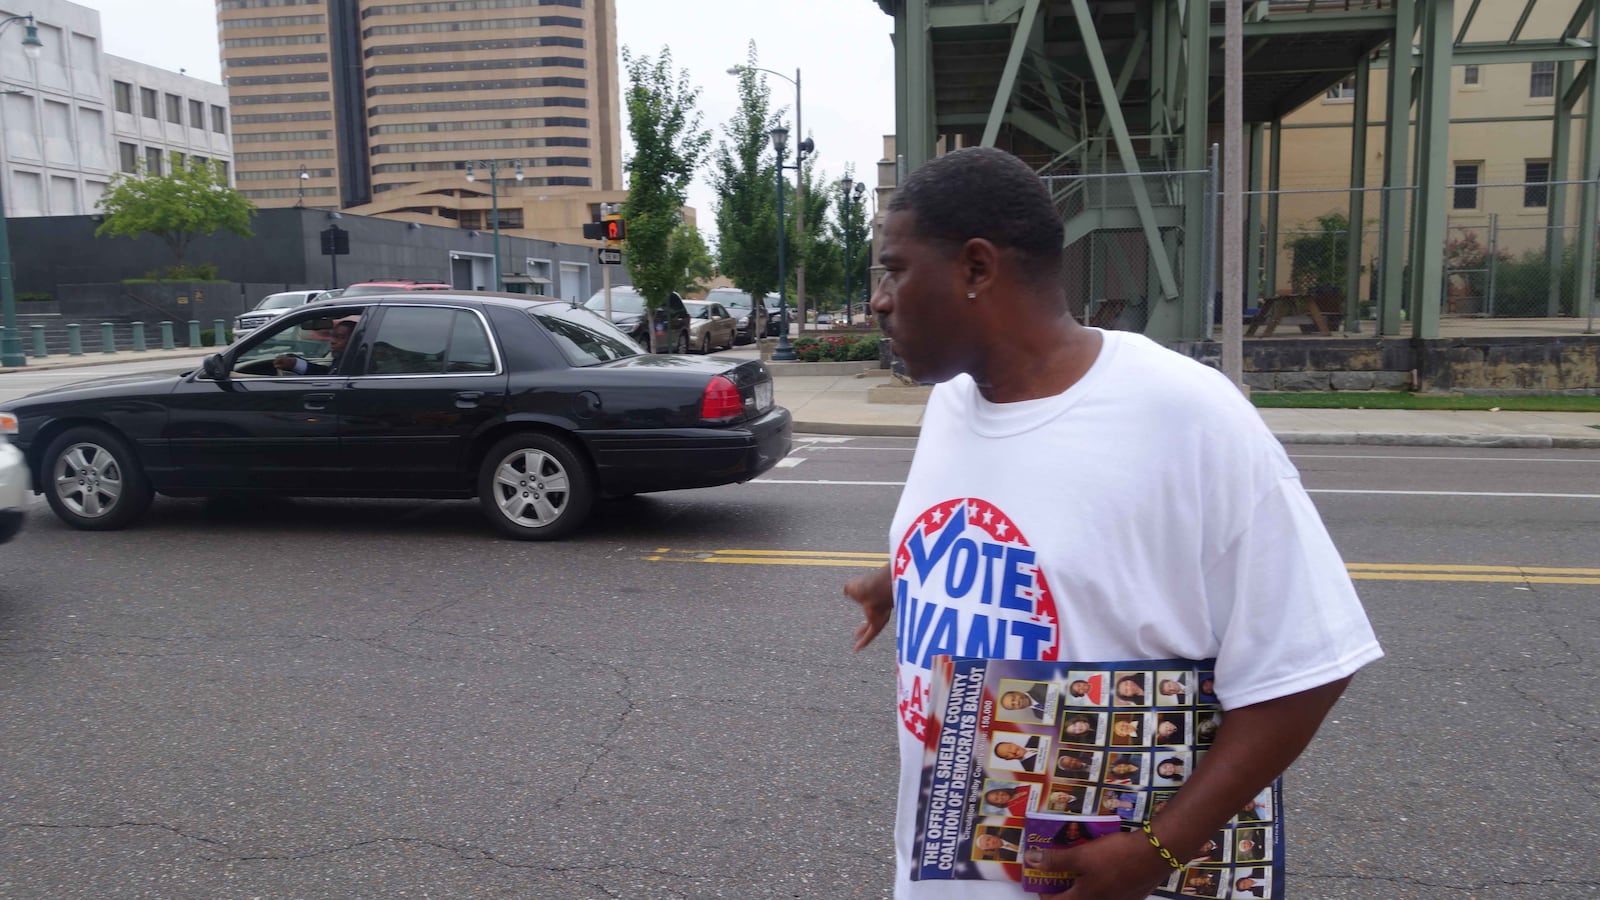 Warren Cox, a poll worker for Shante Avant, returns to the sidewalk after asking for the vote of a man waiting at a stoplight on the first day of early voting.